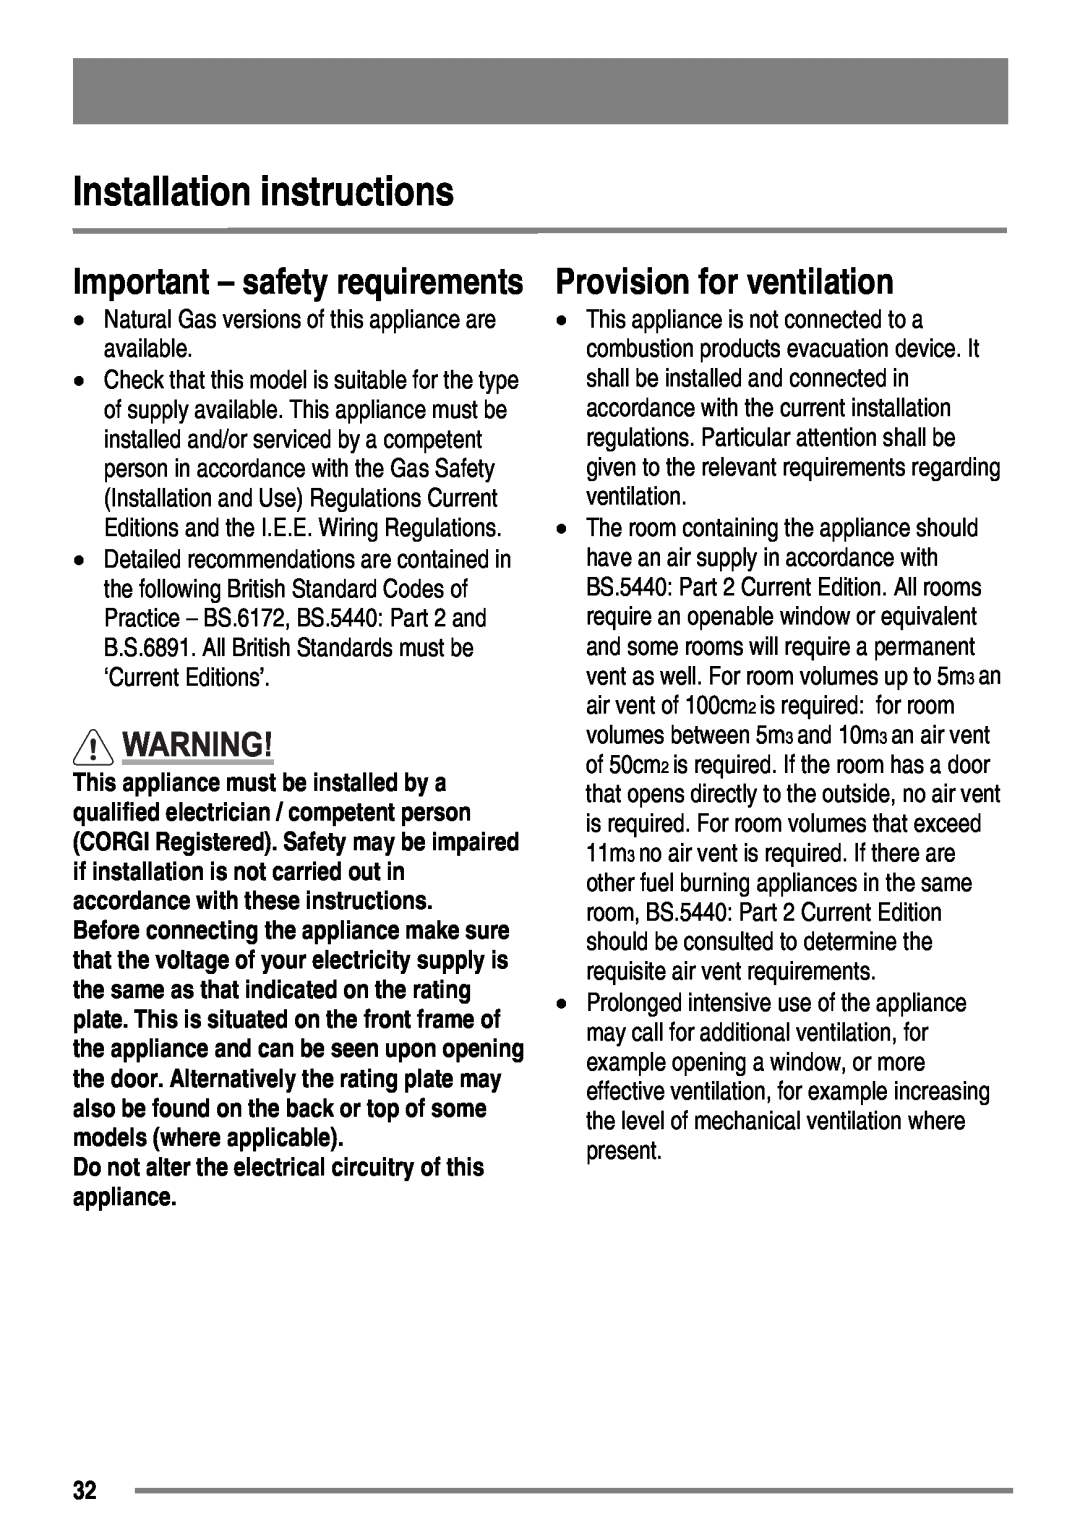 Tricity Bendix SG558/1 user manual Installation instructions, Provision for ventilation, Important - safety requirements 